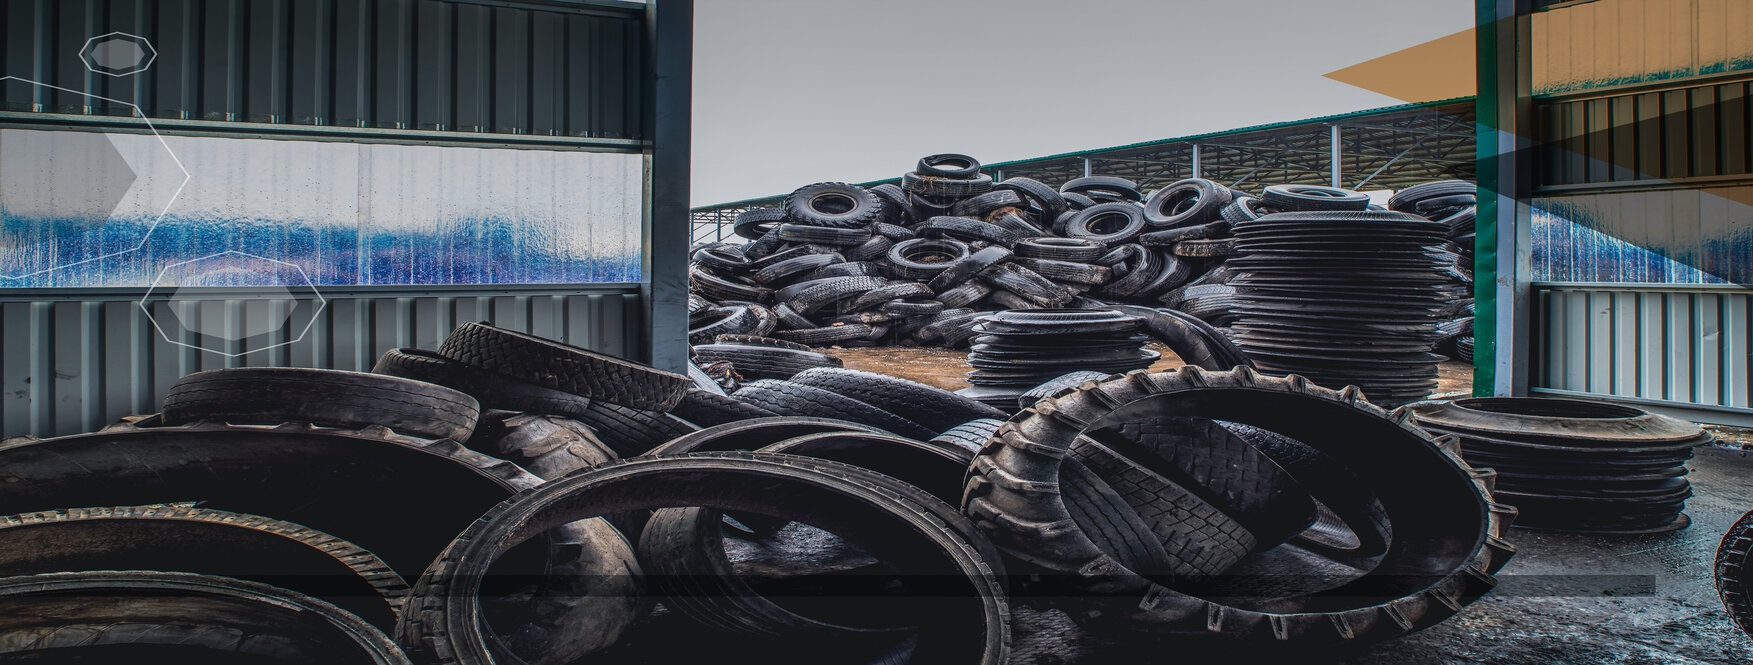 End of life black tires piled in a facility